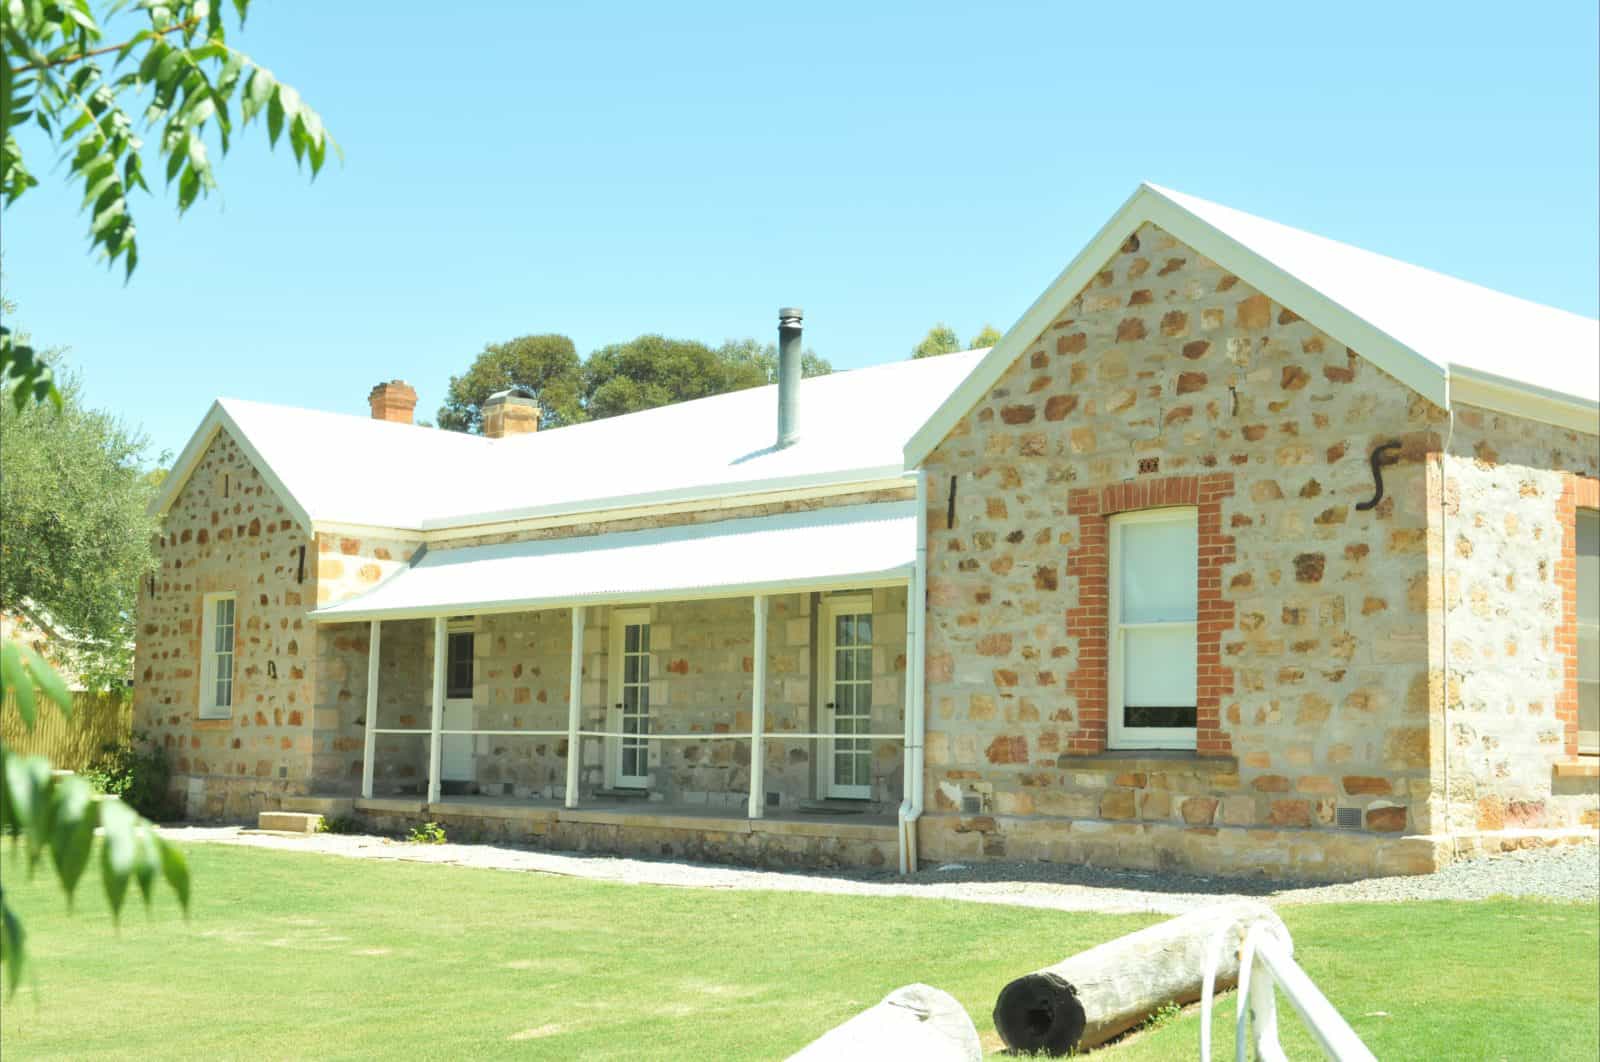 The Manager's House at Bungaree Station is a 3 bedroom cottage, accommodating up to 7 guests.